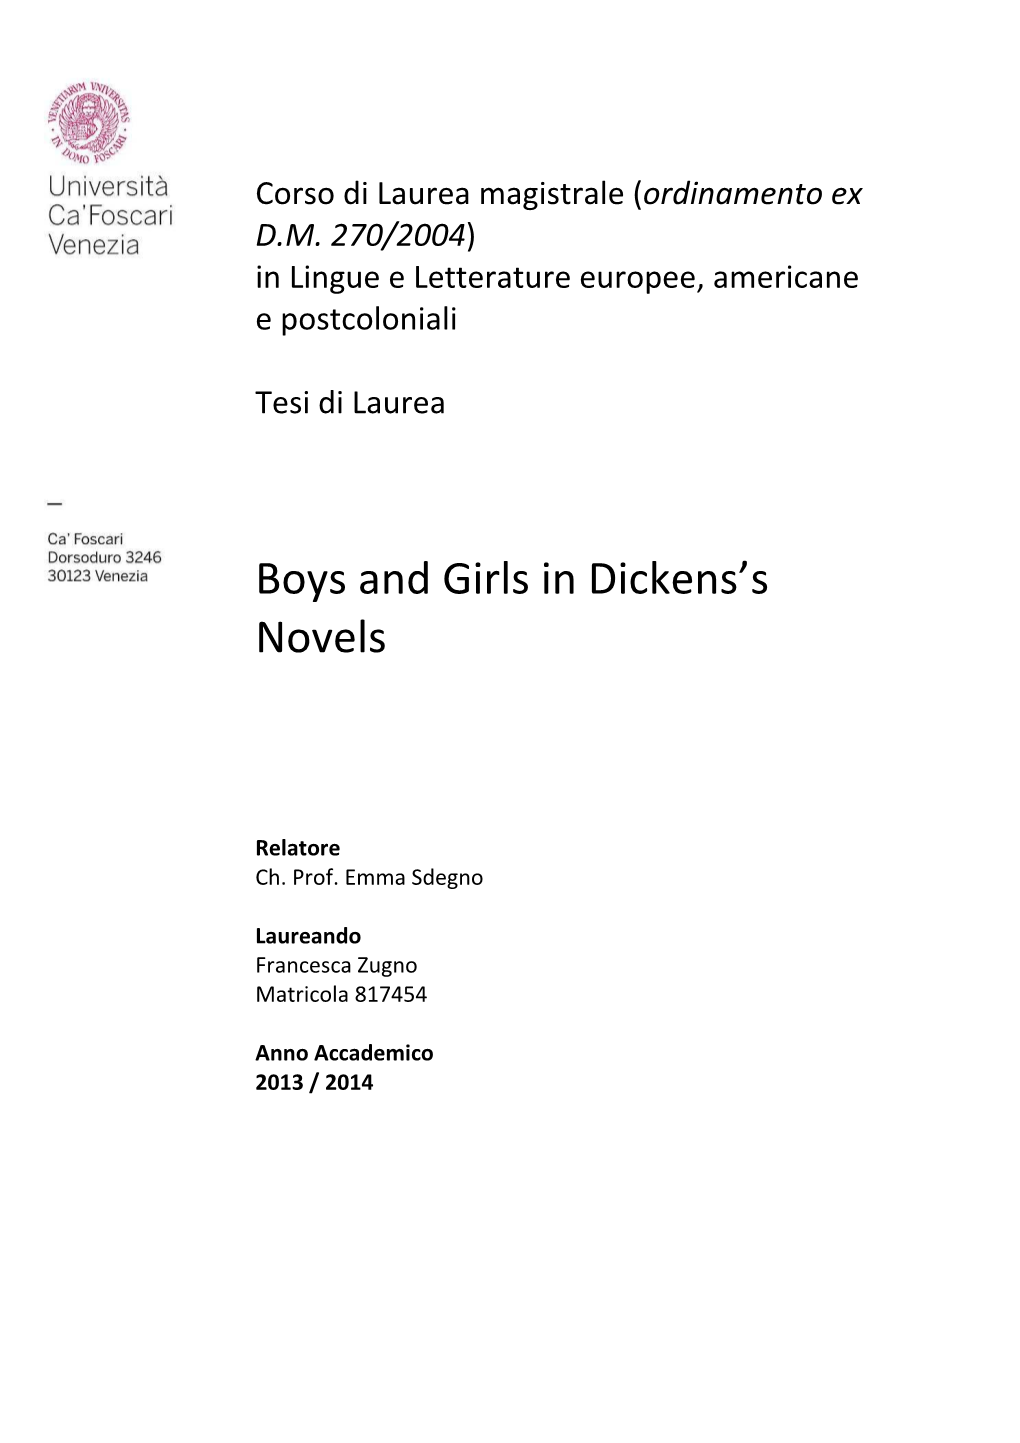 Boys and Girls in Dickens's Novels